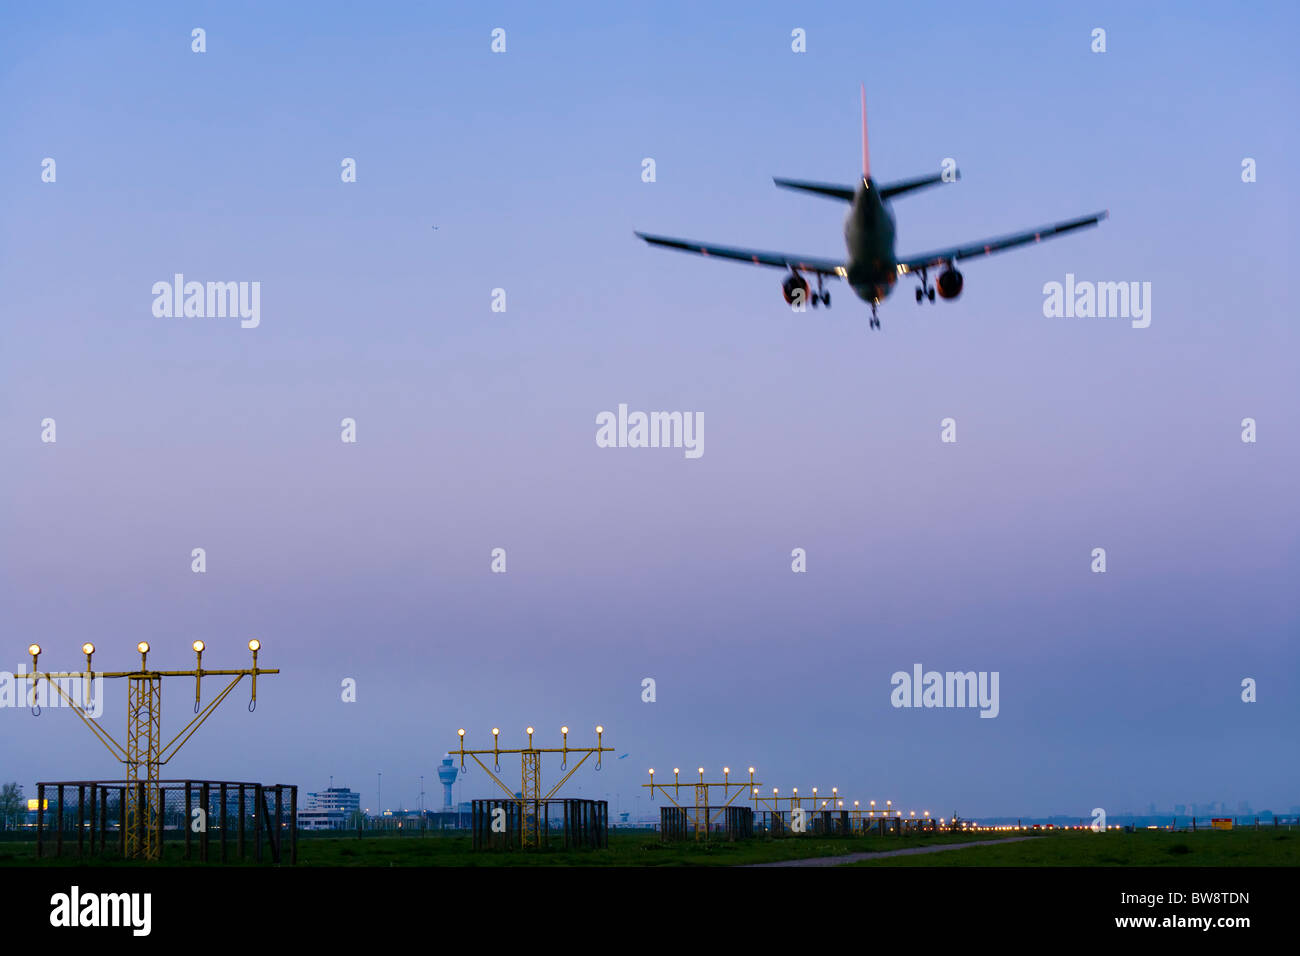 Amsterdam Schiphol Airport at dusk. Airplane plane approaching, landing, on the Kaagbaan runway. Stock Photo